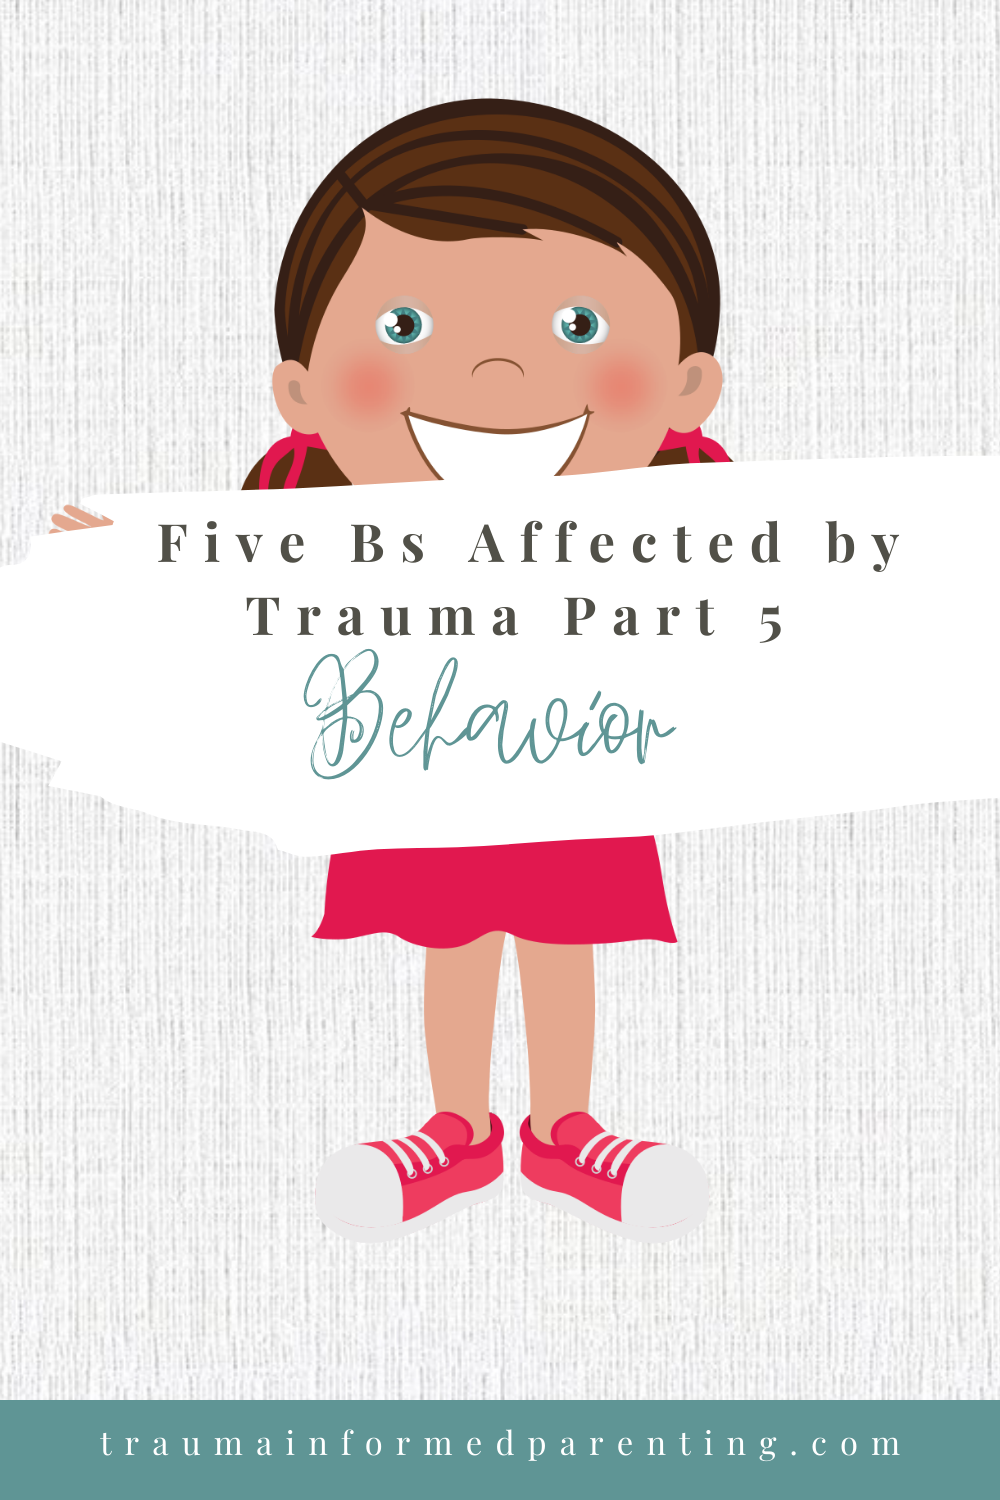 THE FIVE BS AFFECTED BY TRAUMA PART 5- BEHAVIOR